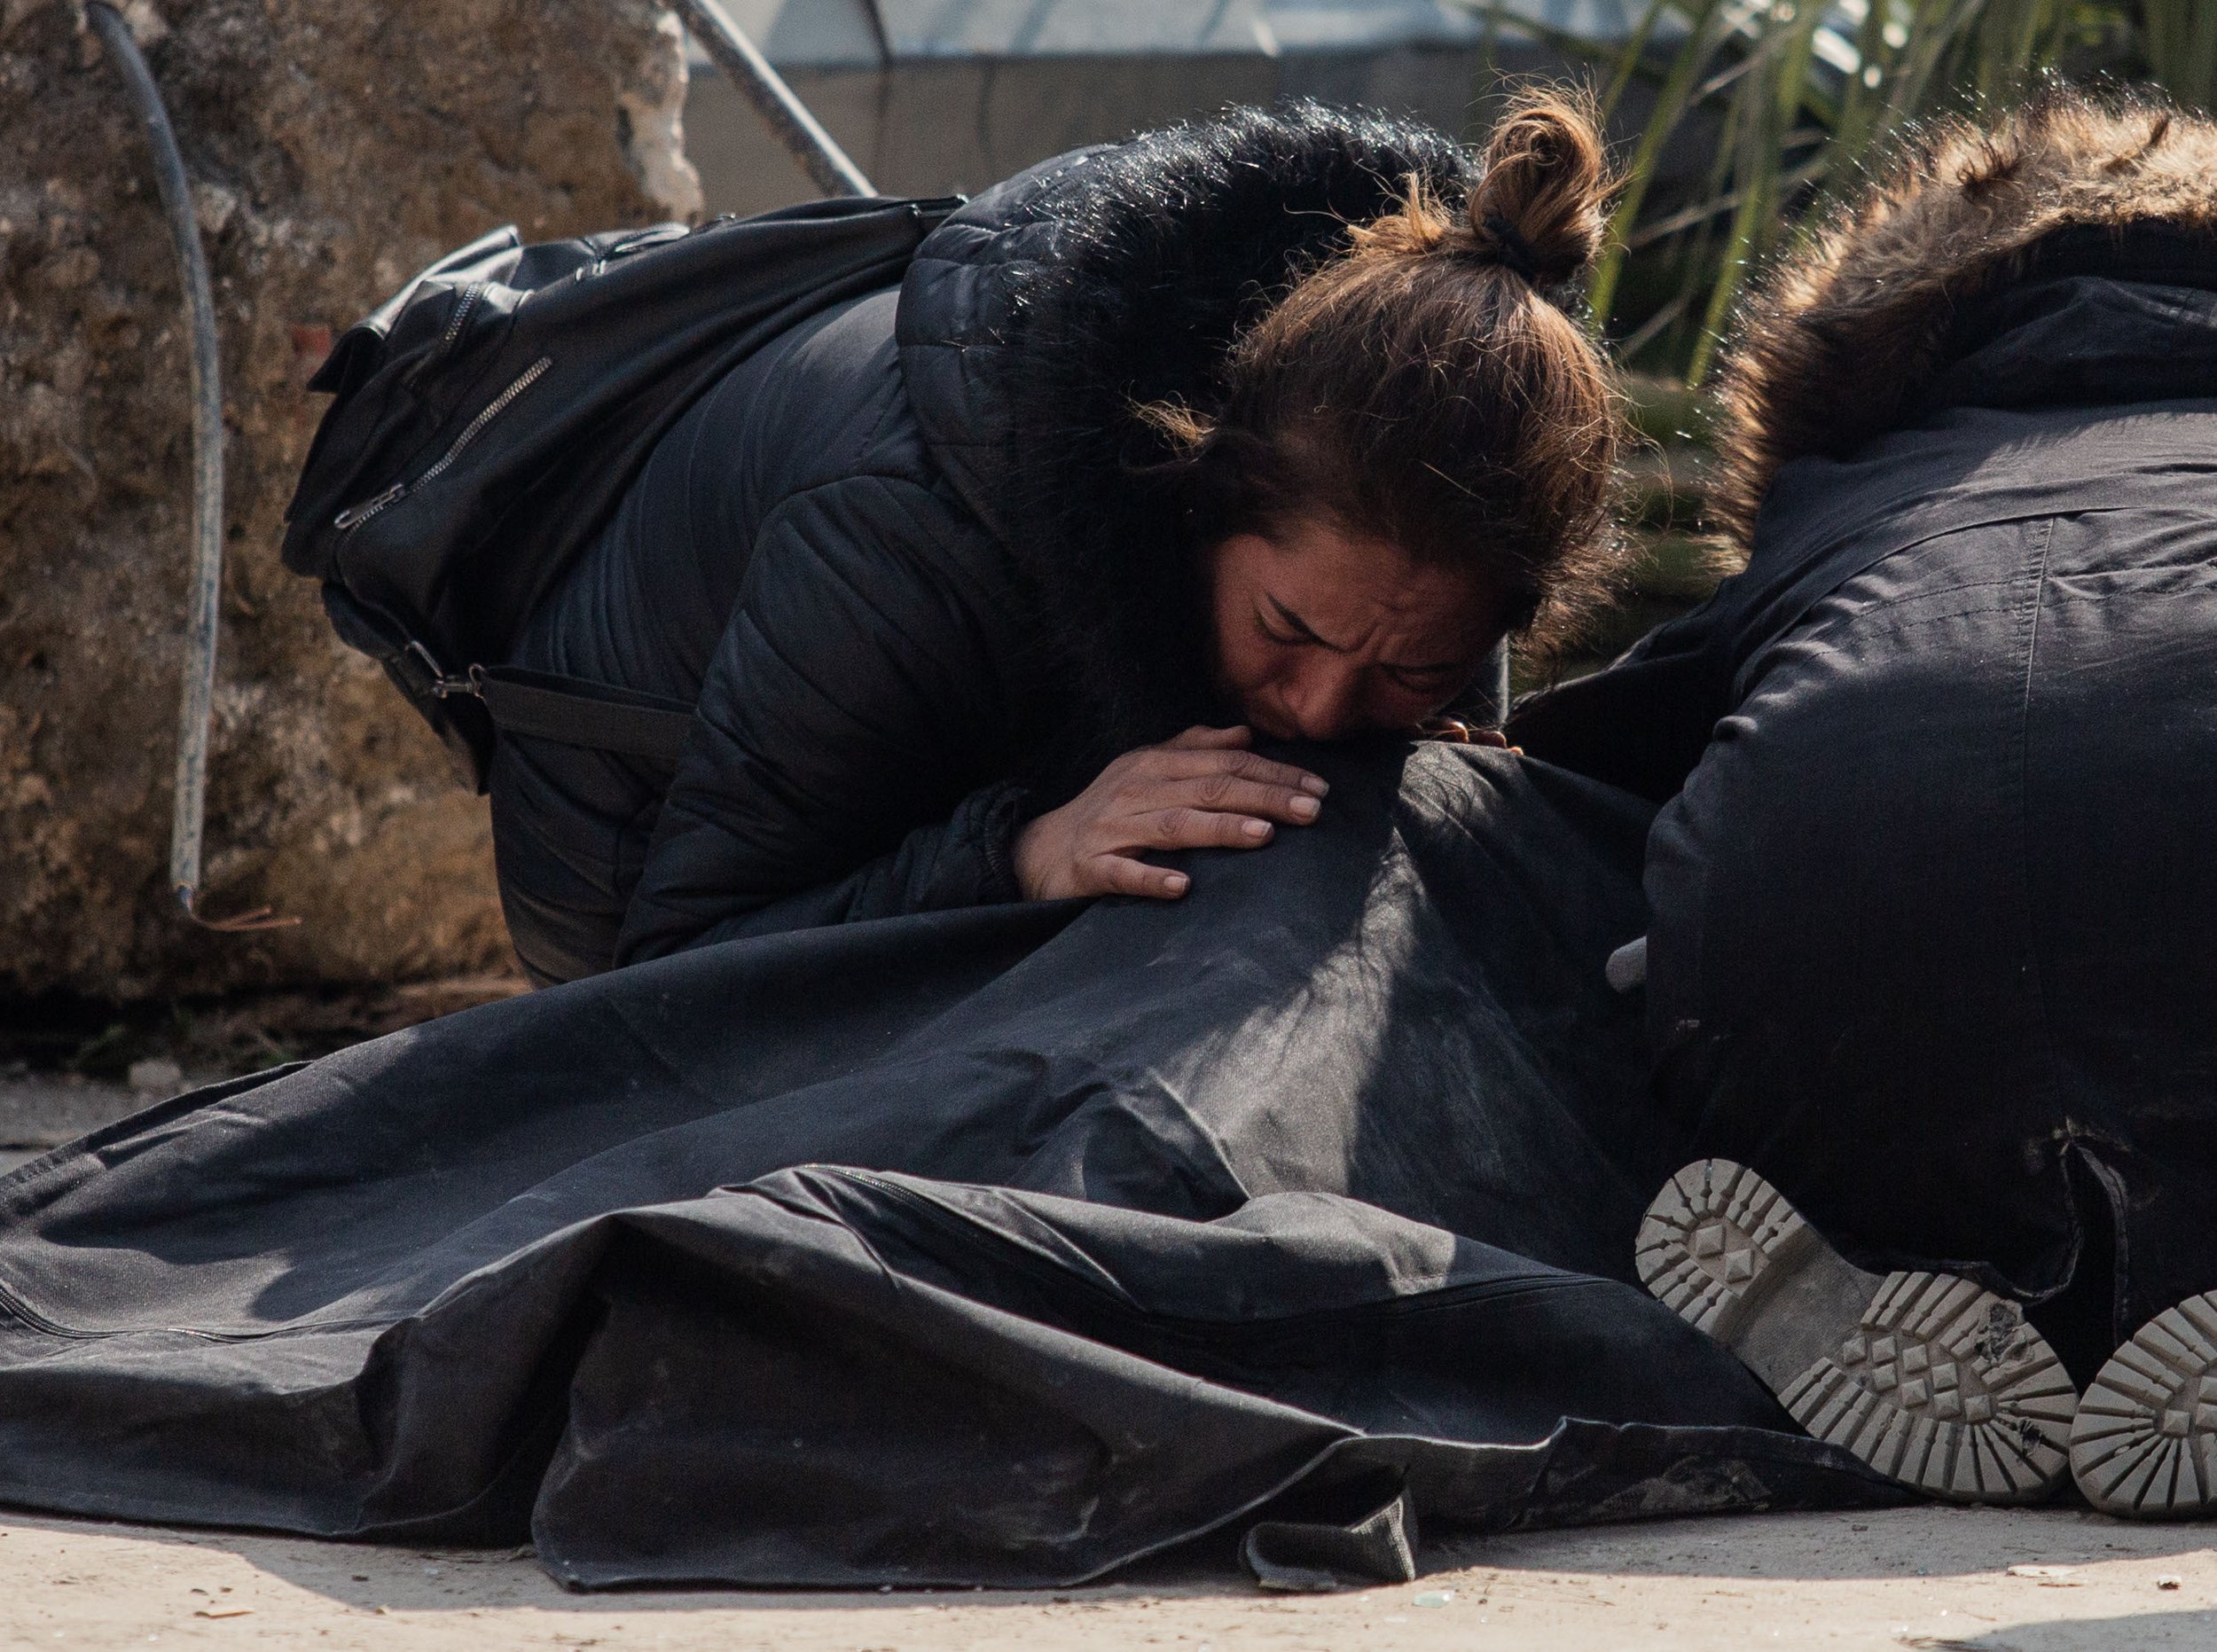  A woman says goodbye to her daughter in a body bag on February 11, 2022, in Hatay, Turkey. 